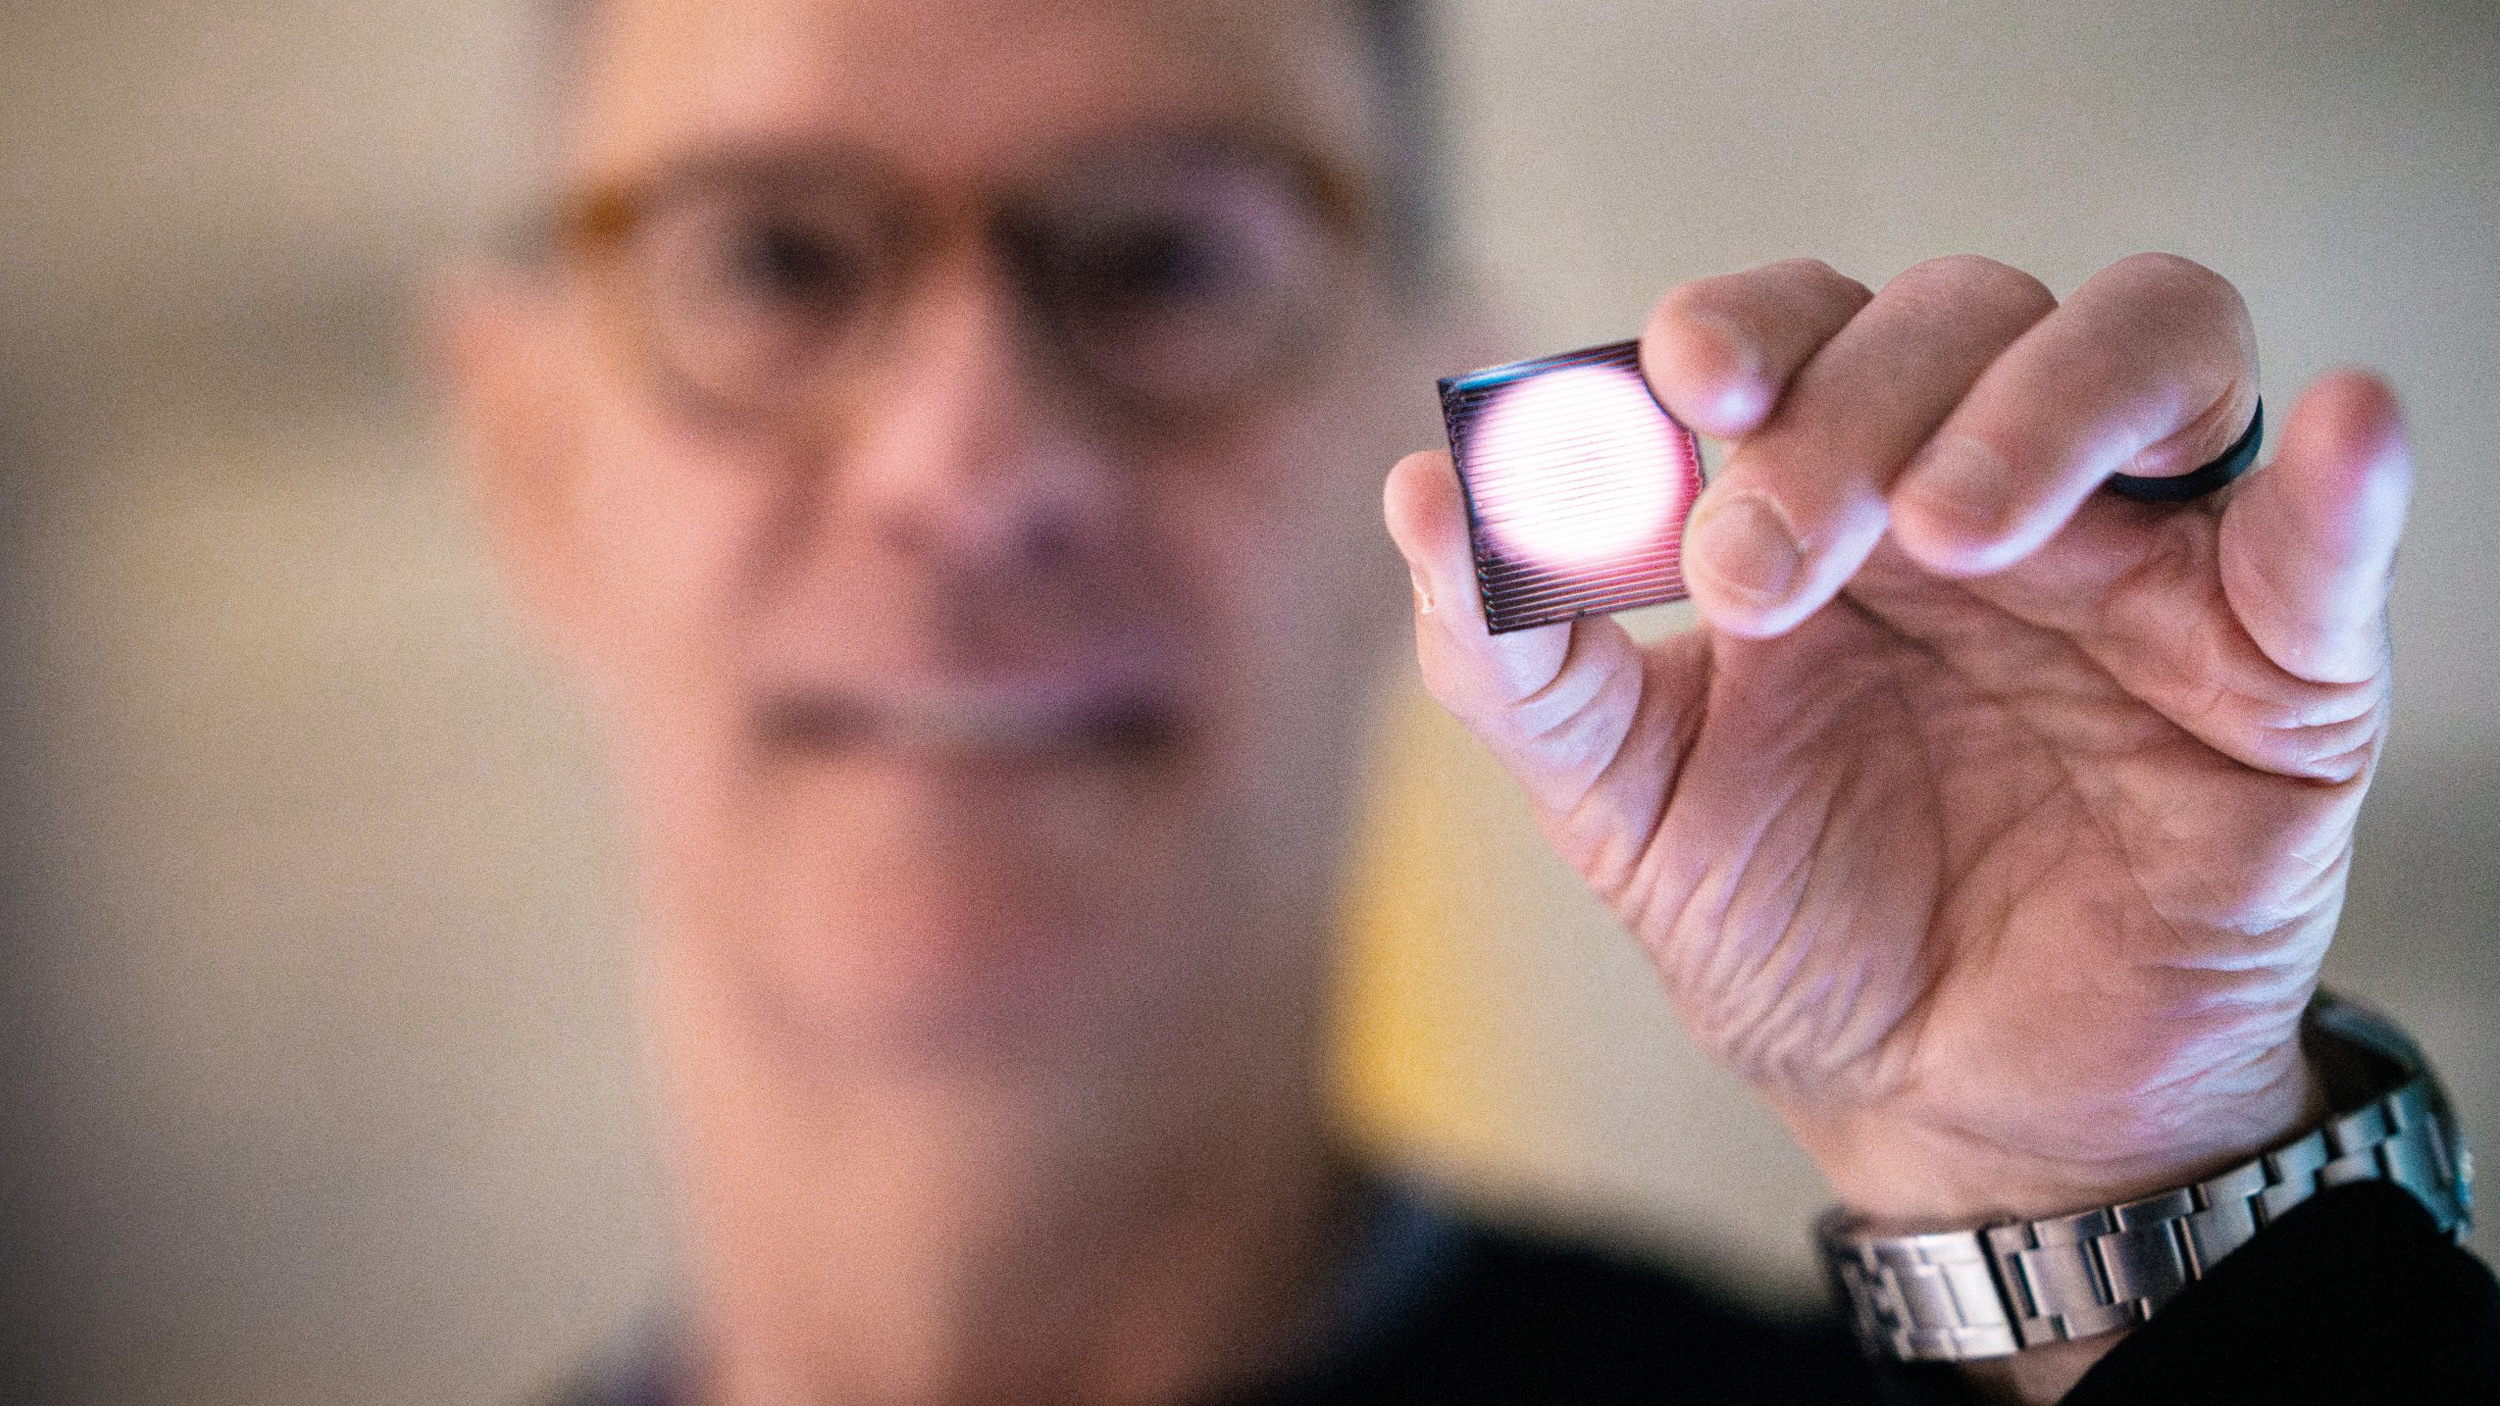 A man is holding up a small device for seizure detection.